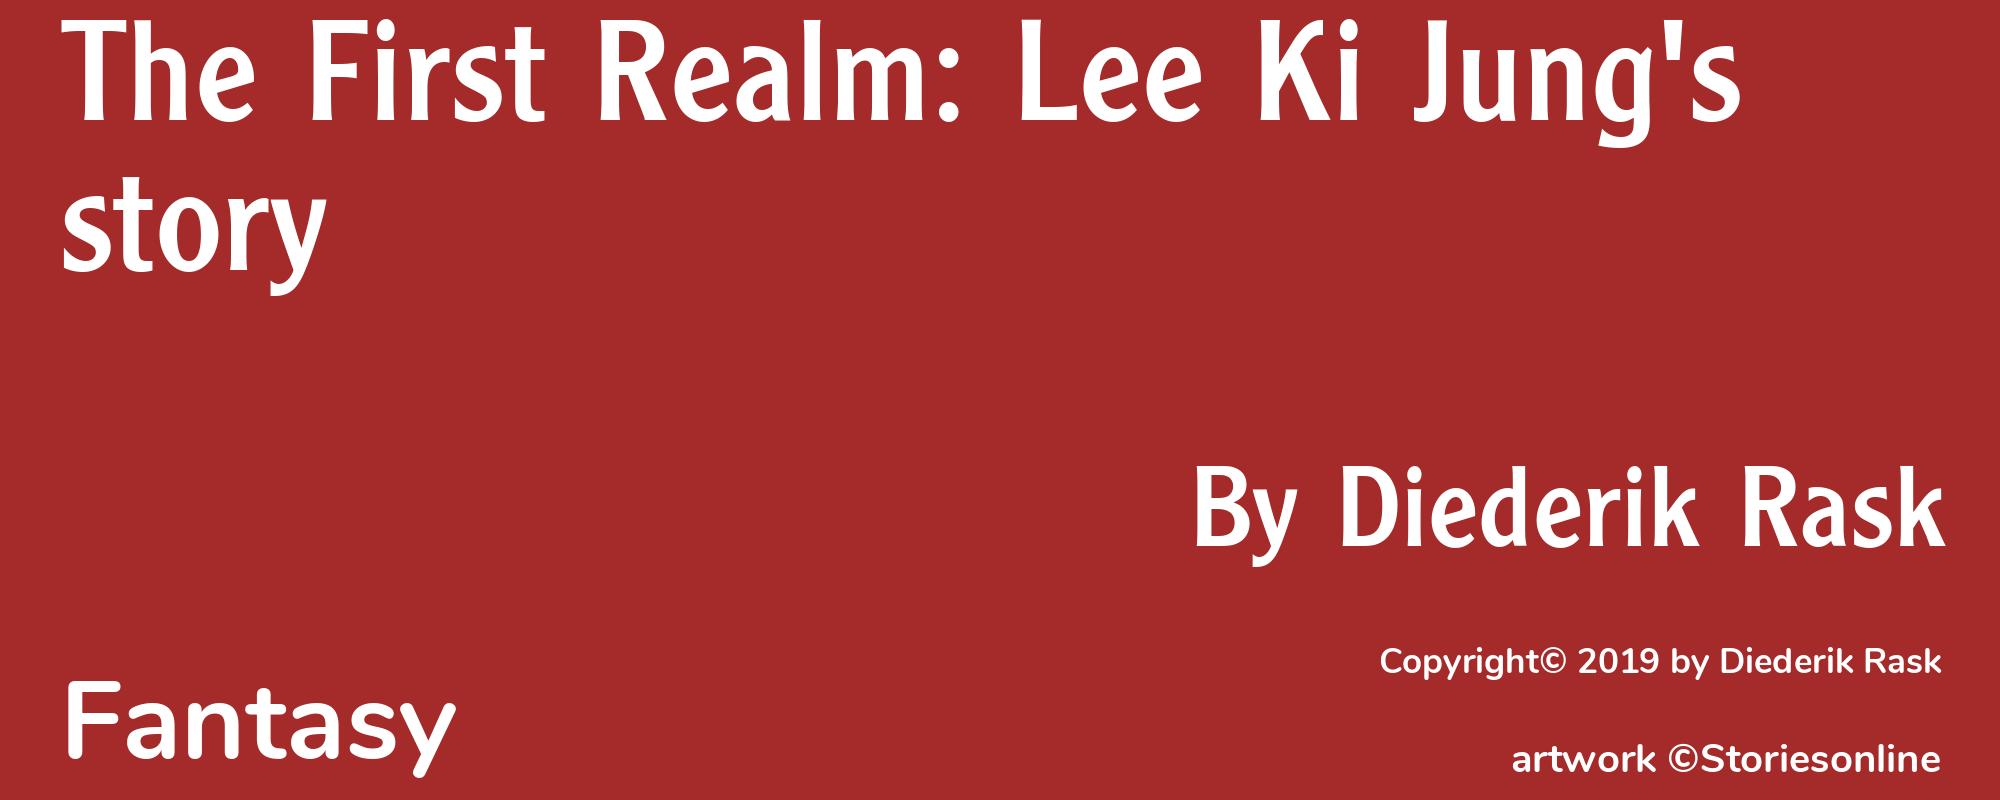 The First Realm: Lee Ki Jung's story - Cover